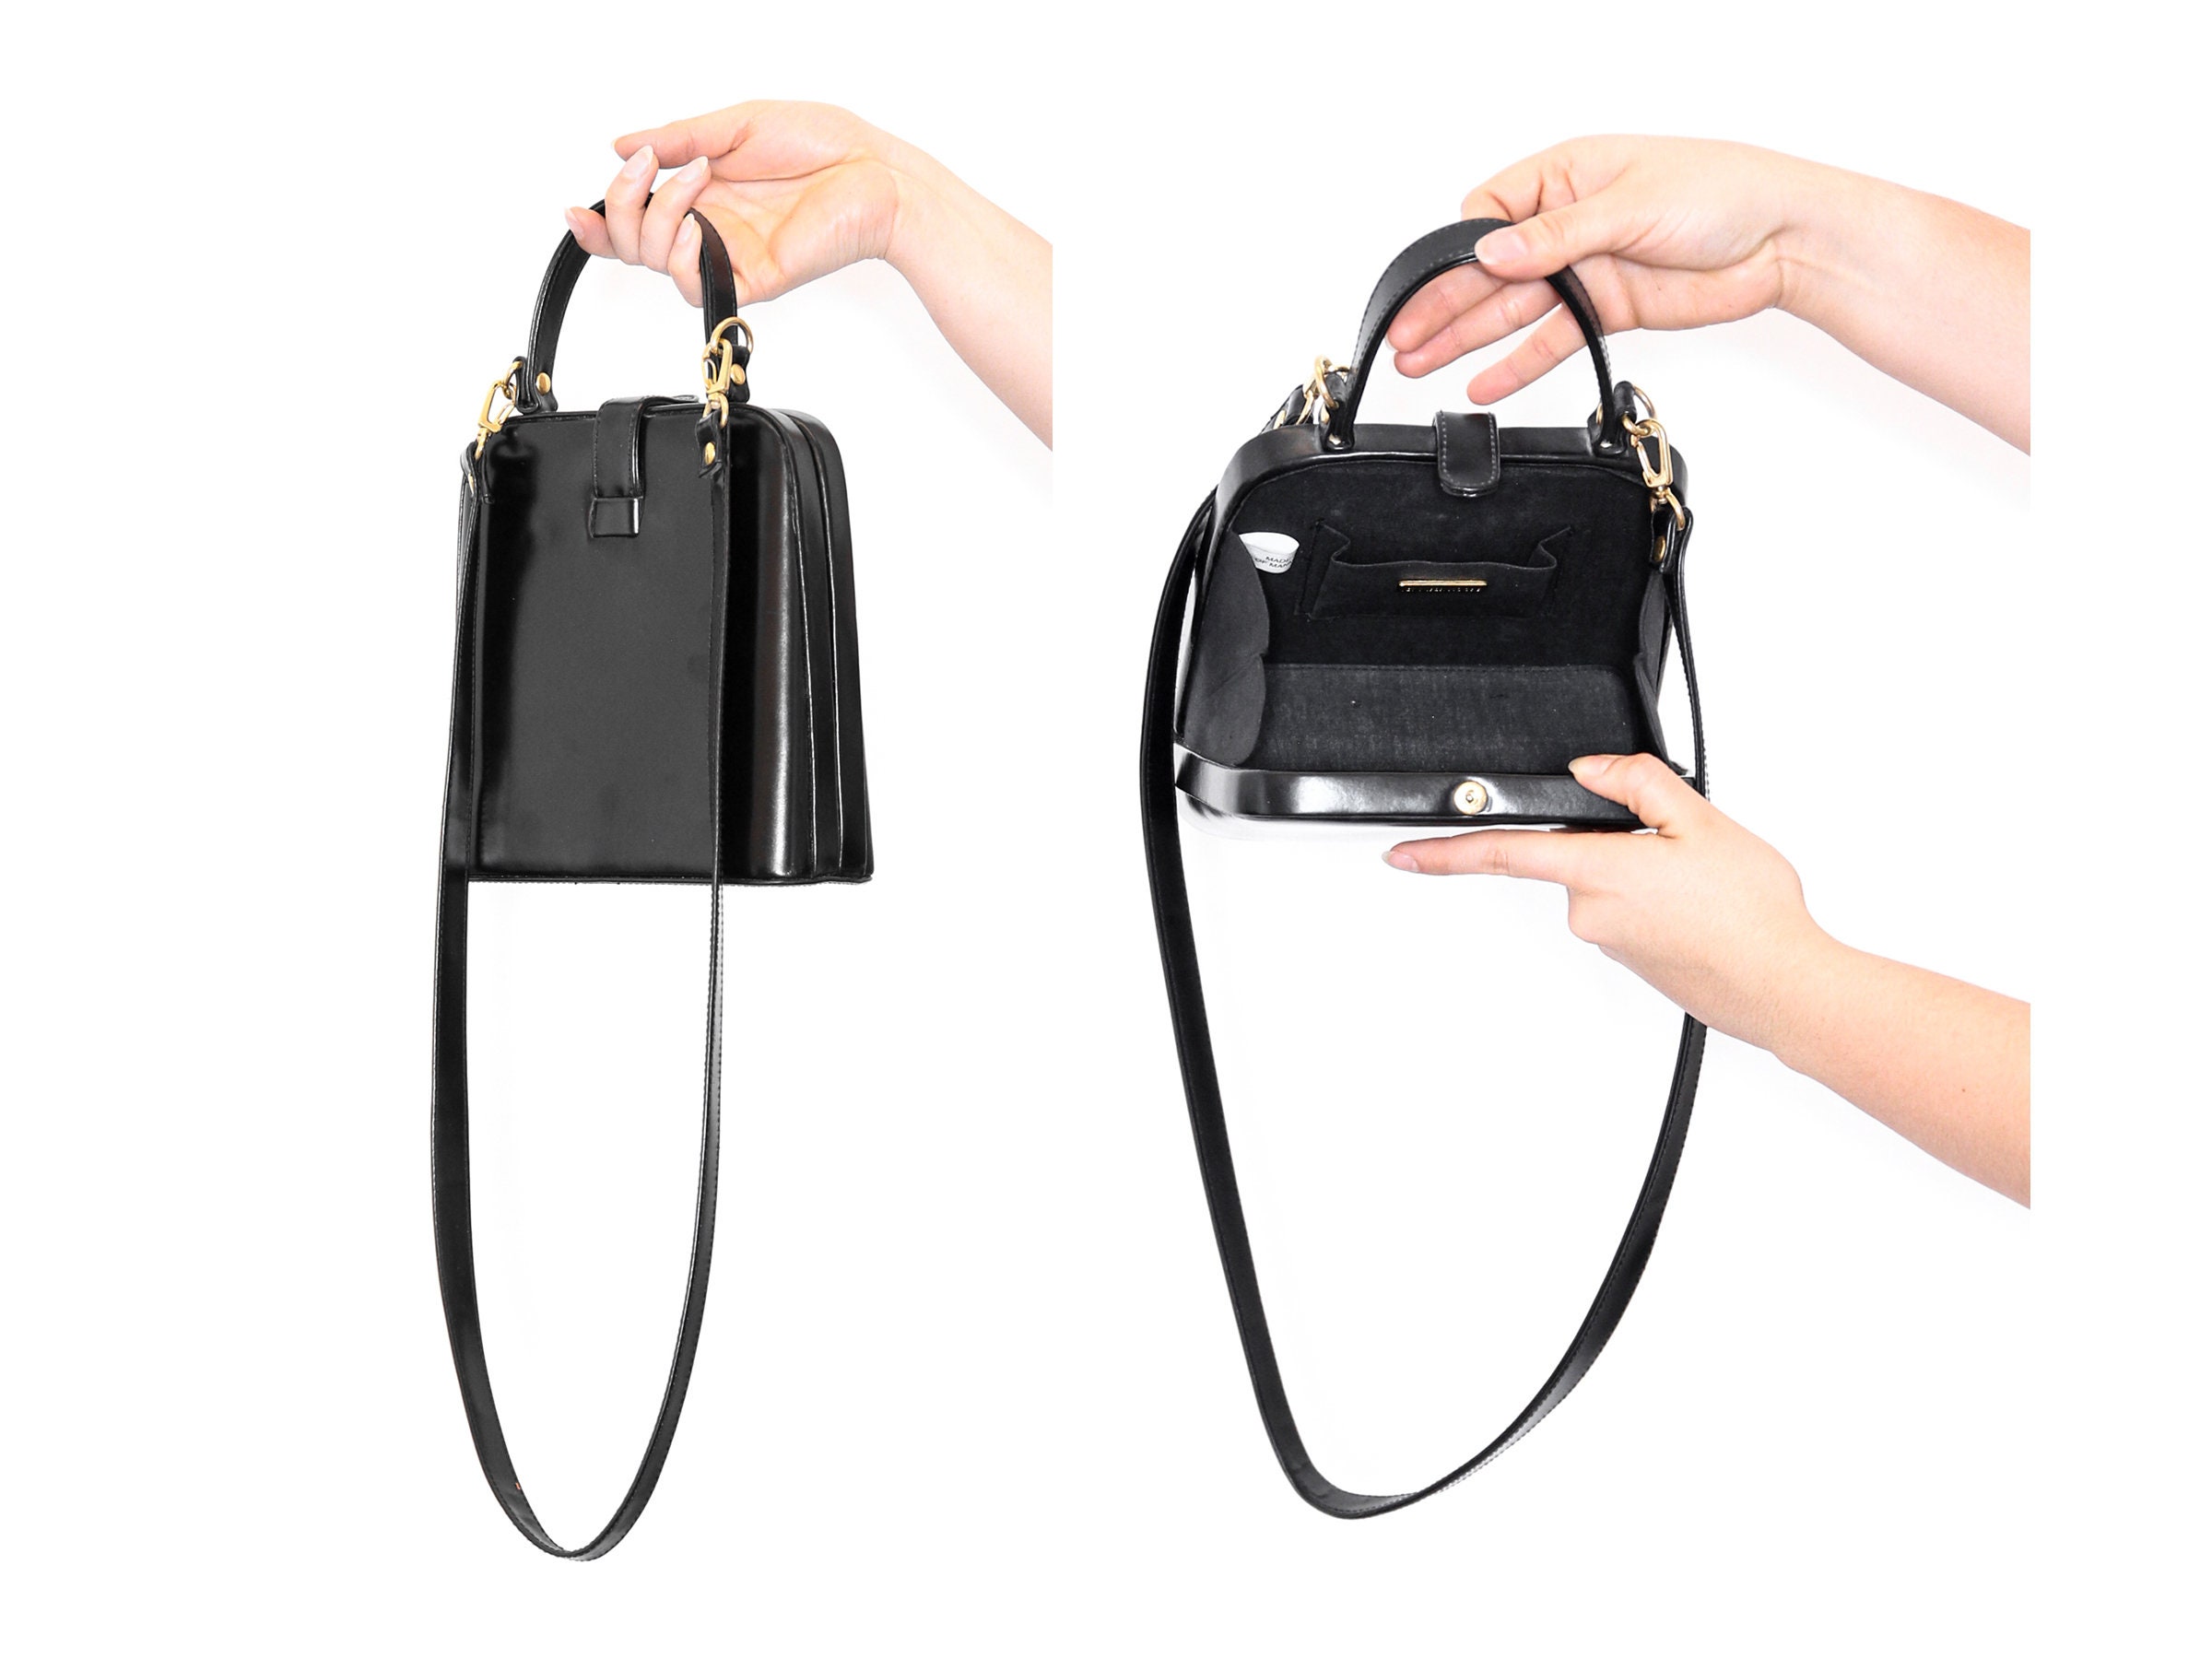 Minimalist Design Chain Embellished Stylish Small Square Bag For Casual  Outfit, New Arrival Shoulder Bag With Unique Crossbody Strap